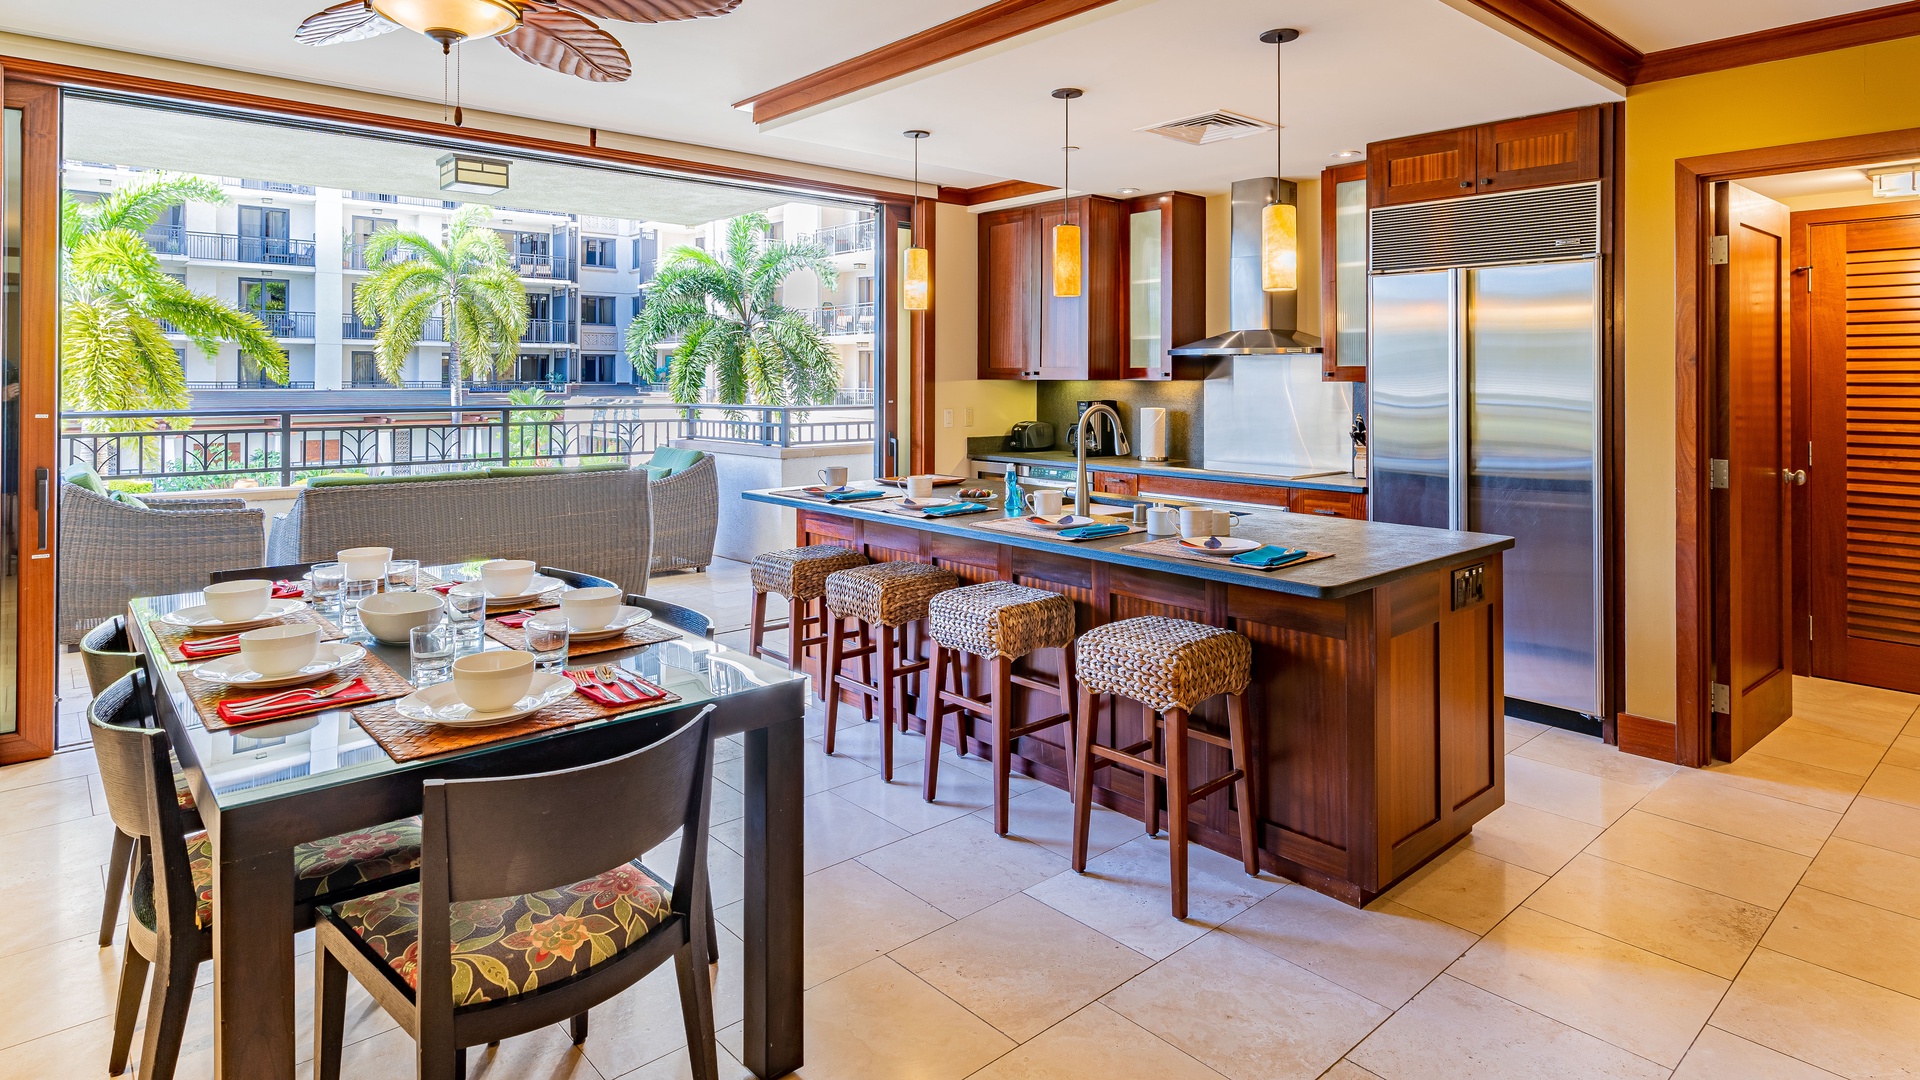 Kapolei Vacation Rentals, Ko Olina Beach Villas O224 - The kitchen with stainless steel appliances and island breezes from the lanai.